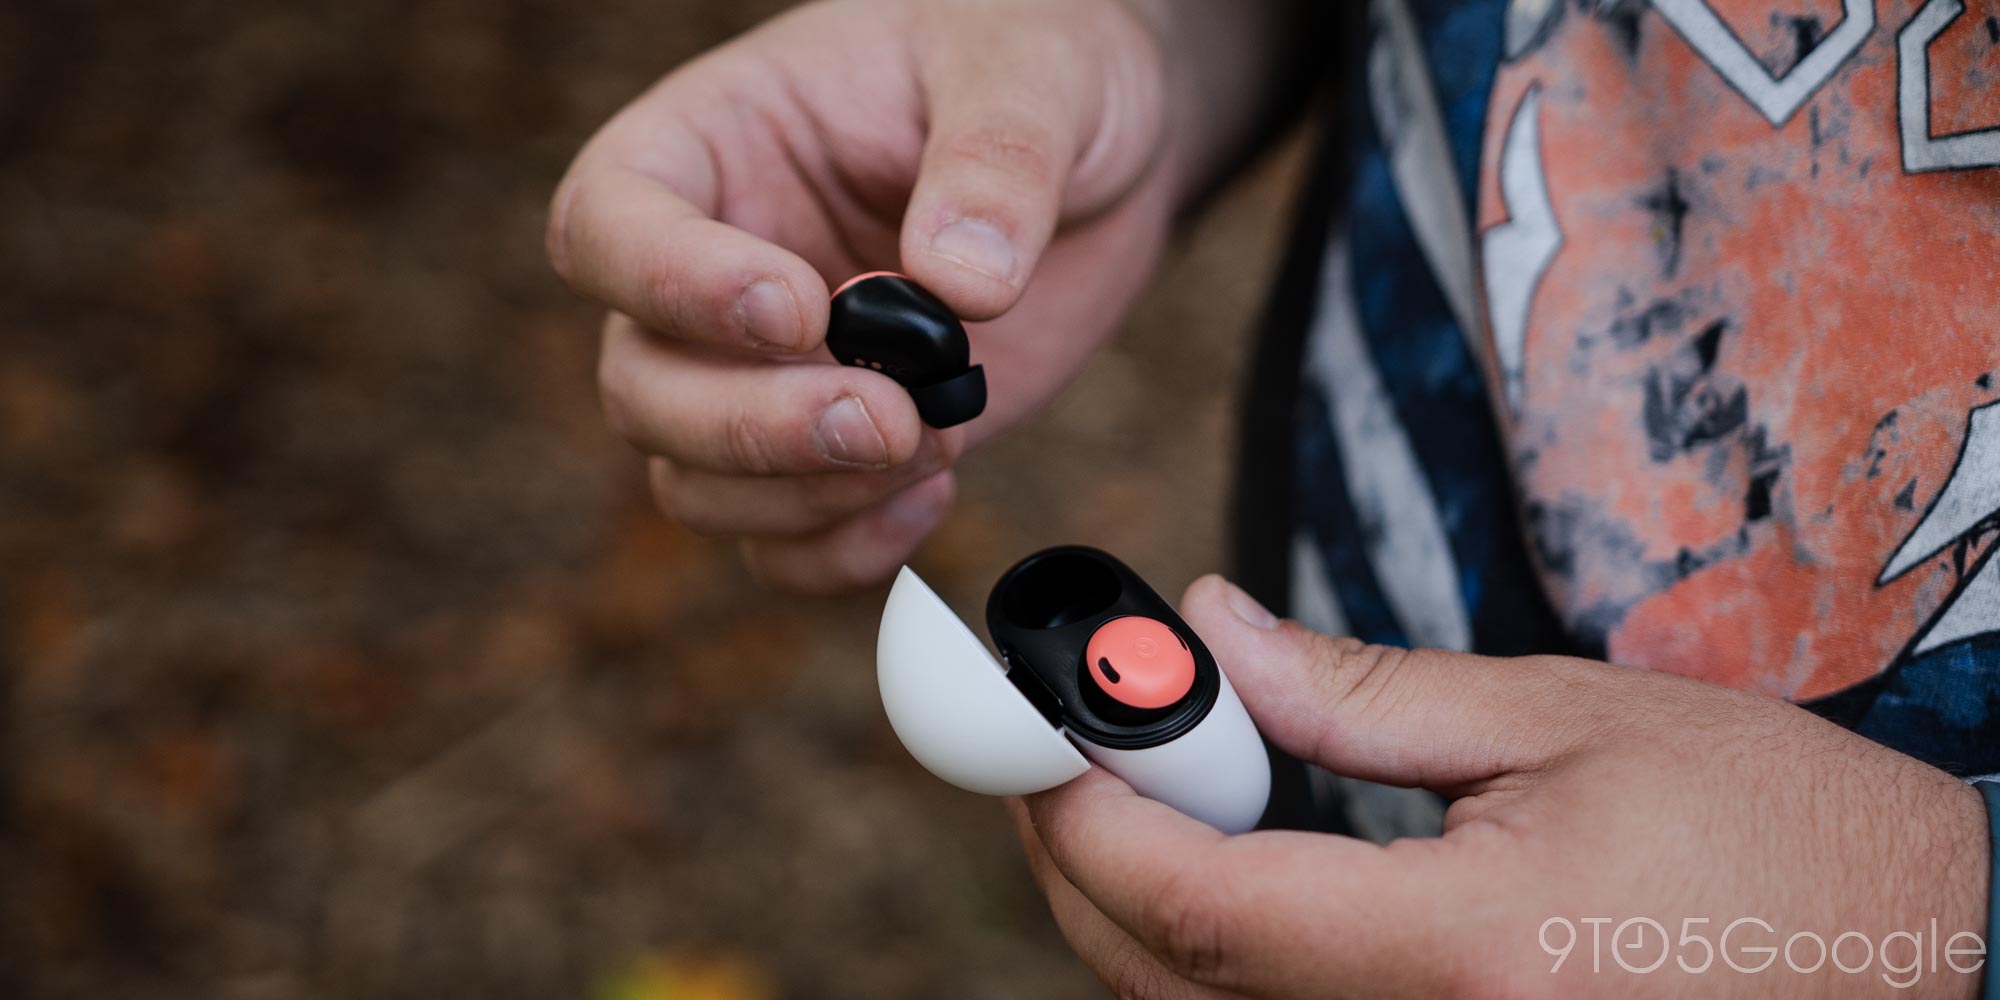 Your Pixel Buds Pro just got a big update. Here's what's new and improved